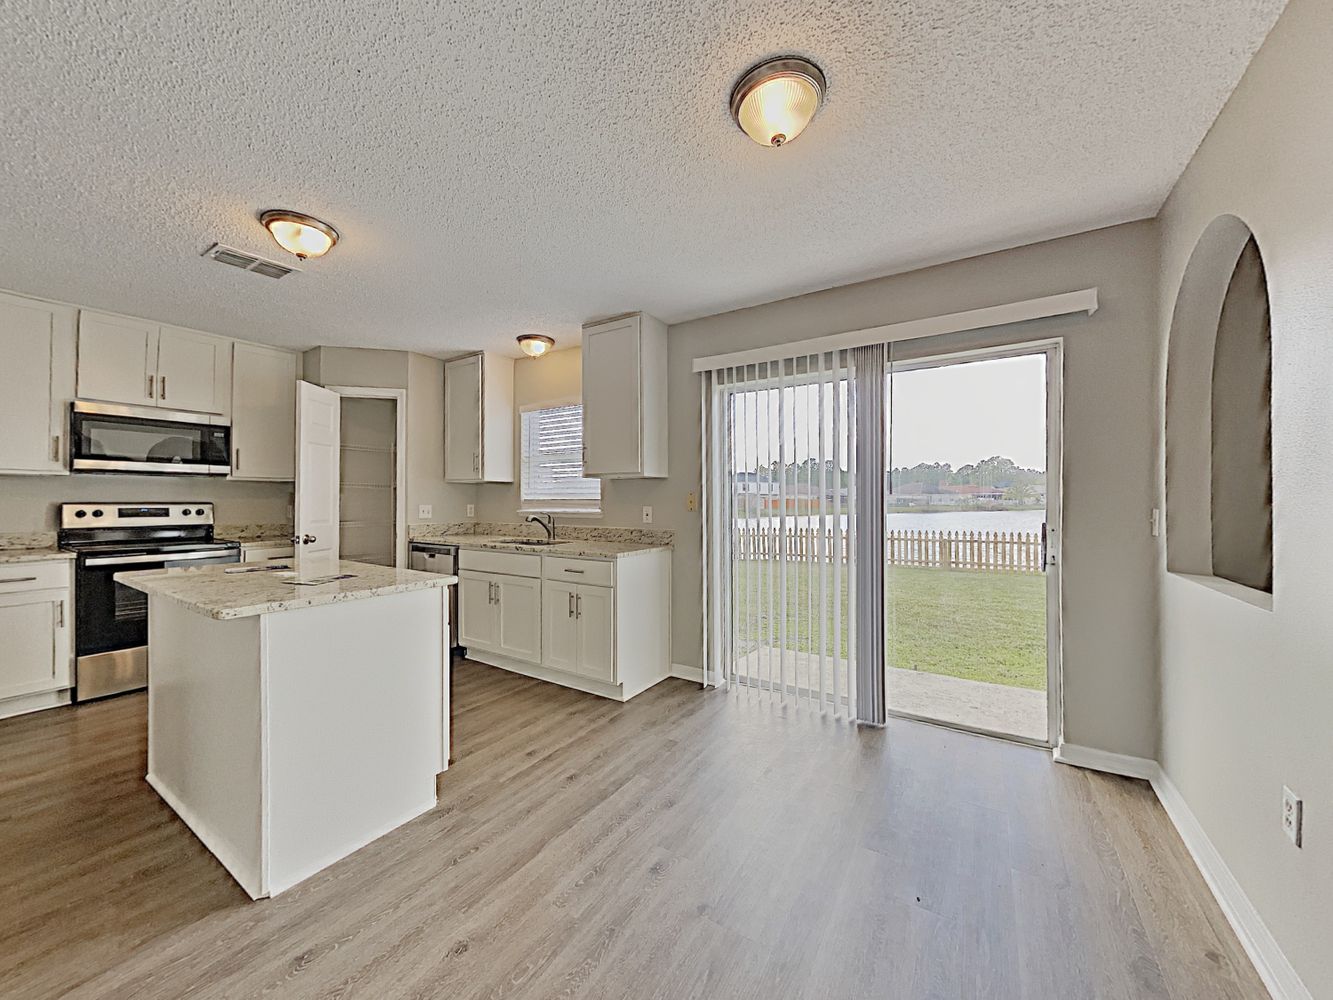 Modern kitchen with stainless steel appliances and an island at Invitation Homes Jacksonville.